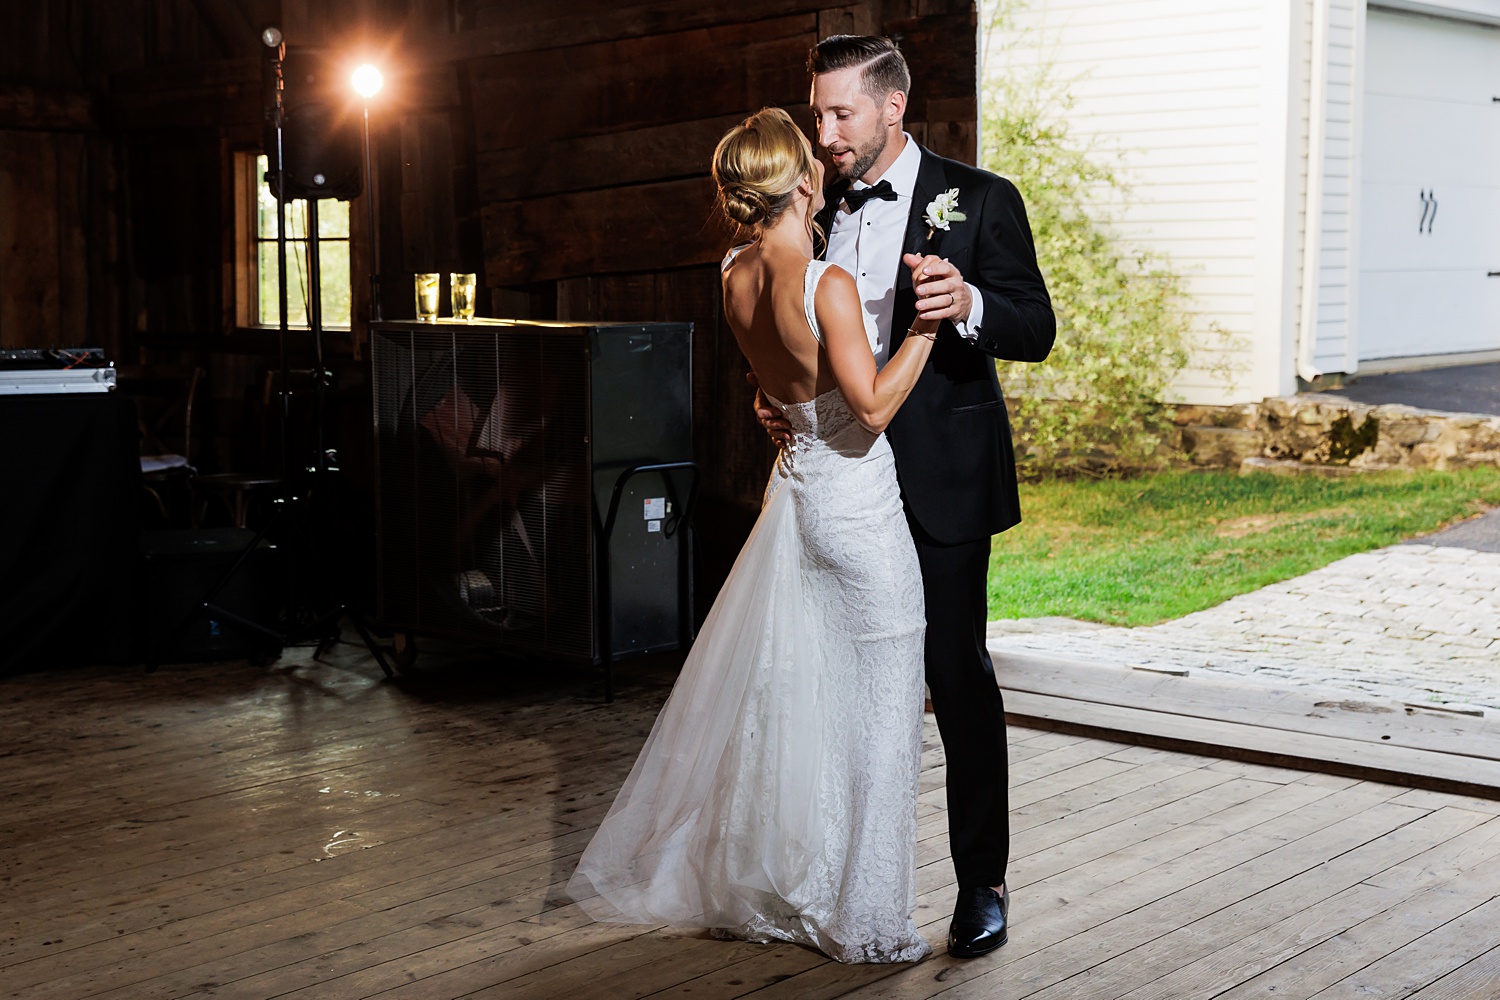 First dance for the bride and groom at Cunningham Farm